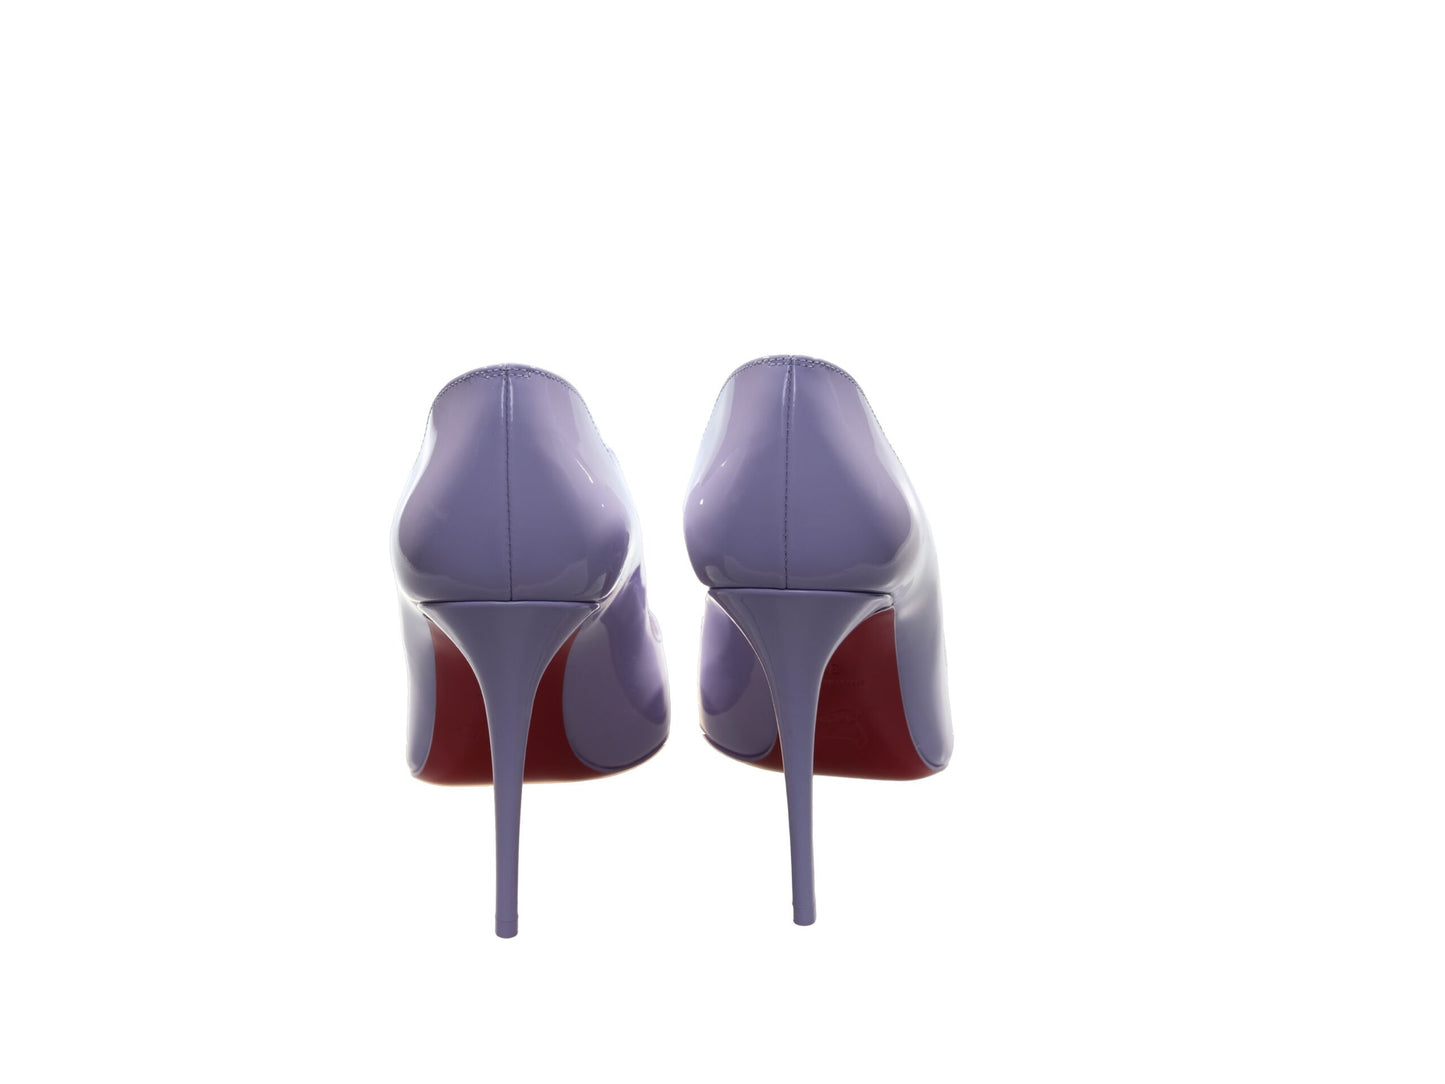 Christian Louboutin Hot Chick 100 Lilac Patent Leather High Heel Pump